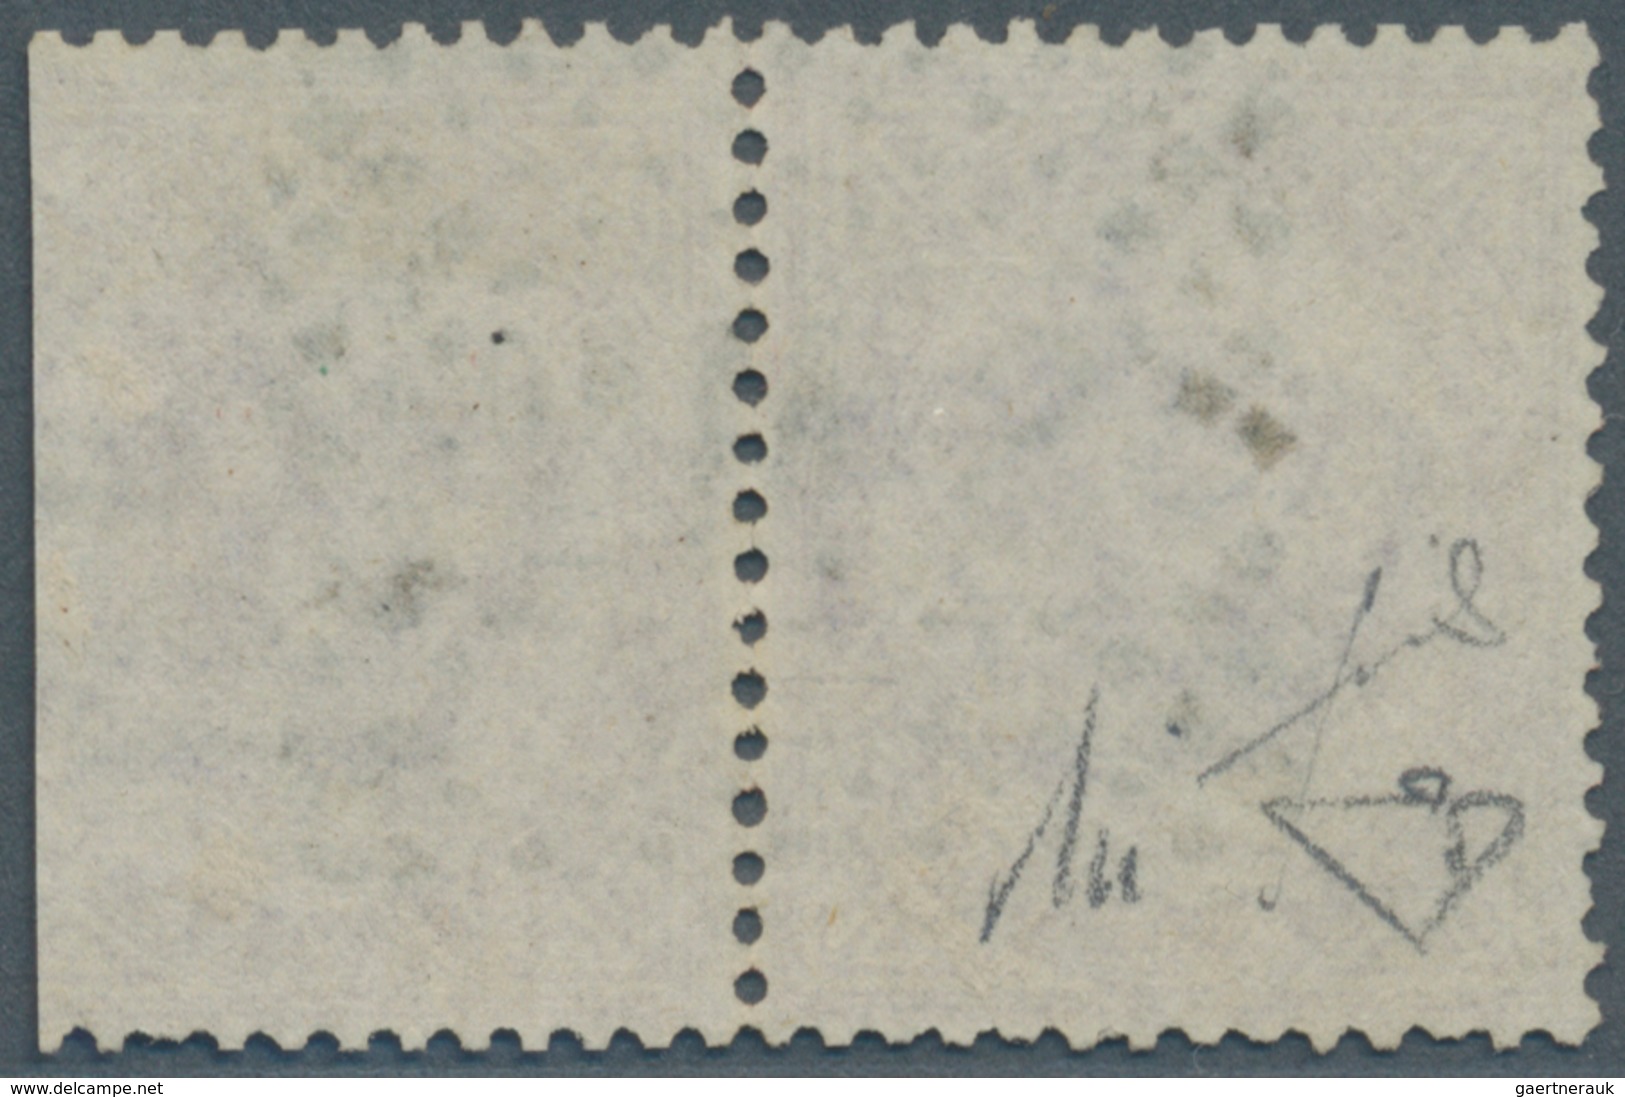 San Marino: FORERUNNER ITALY: 1863, 60 C Light Lila Horizontal Pair (cut/faults) Cancelled With Clea - Unused Stamps